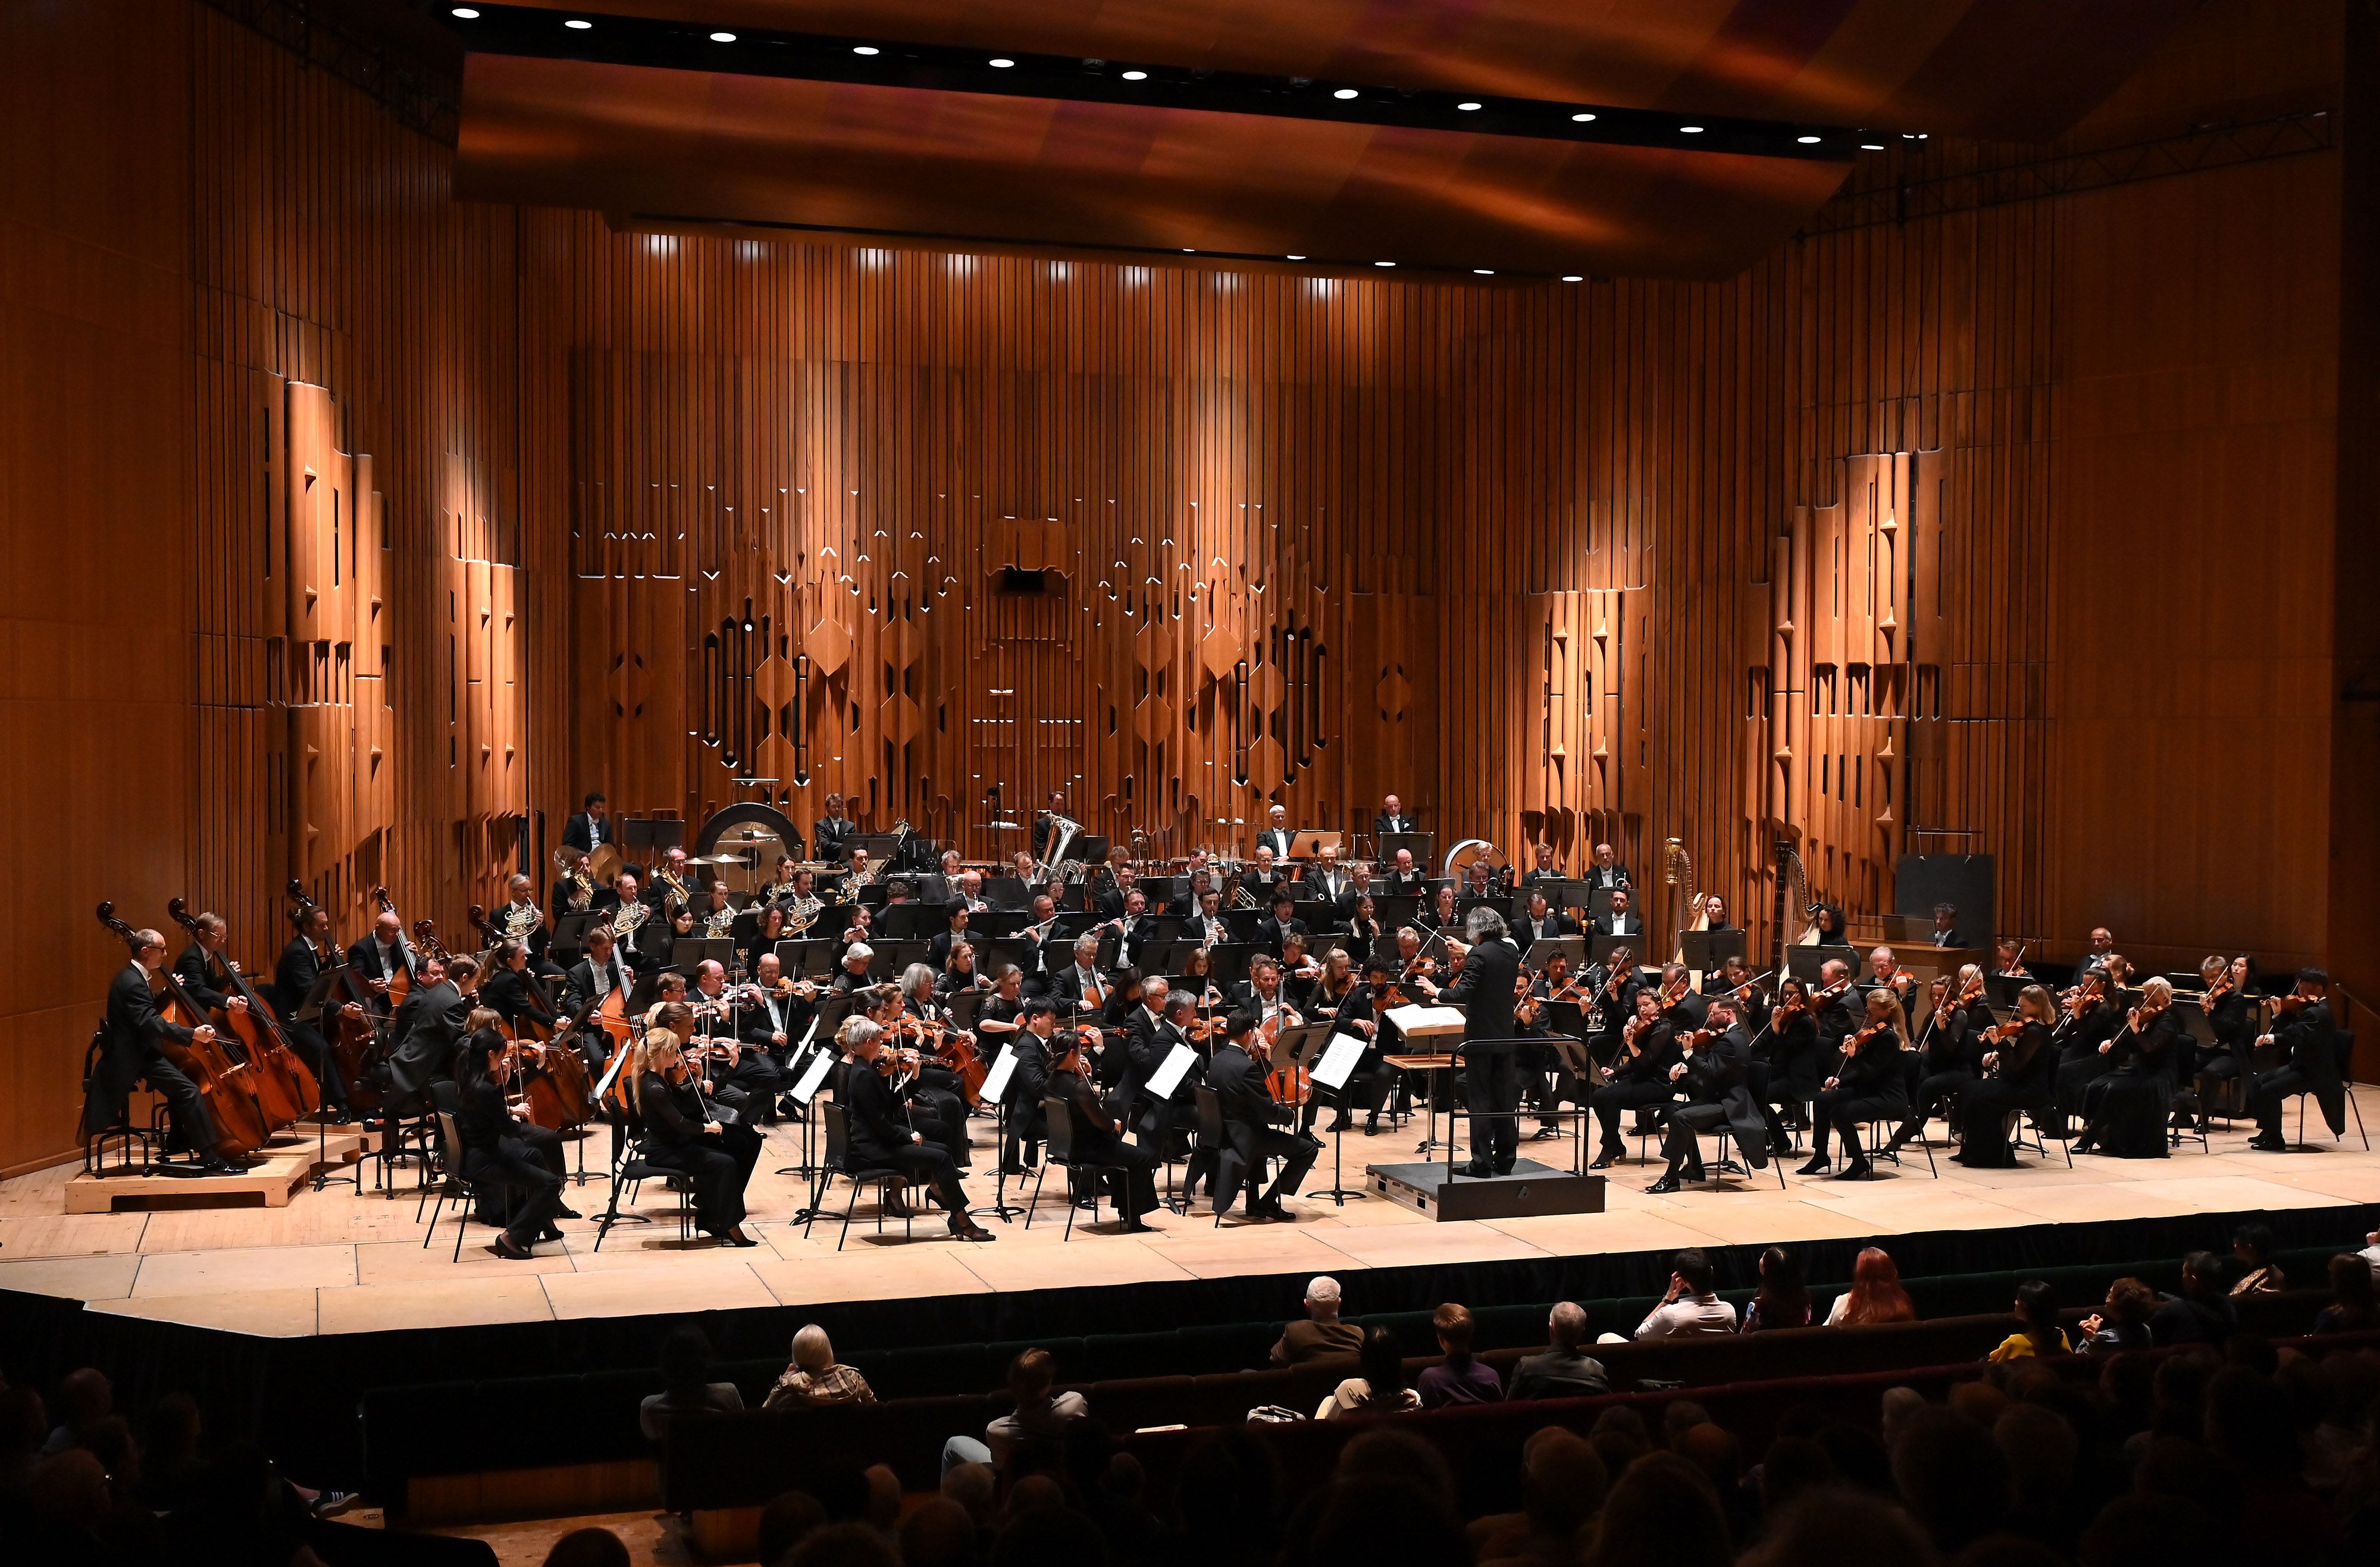 Bayerisches Staatsorchester and Jurowski at the Barbican